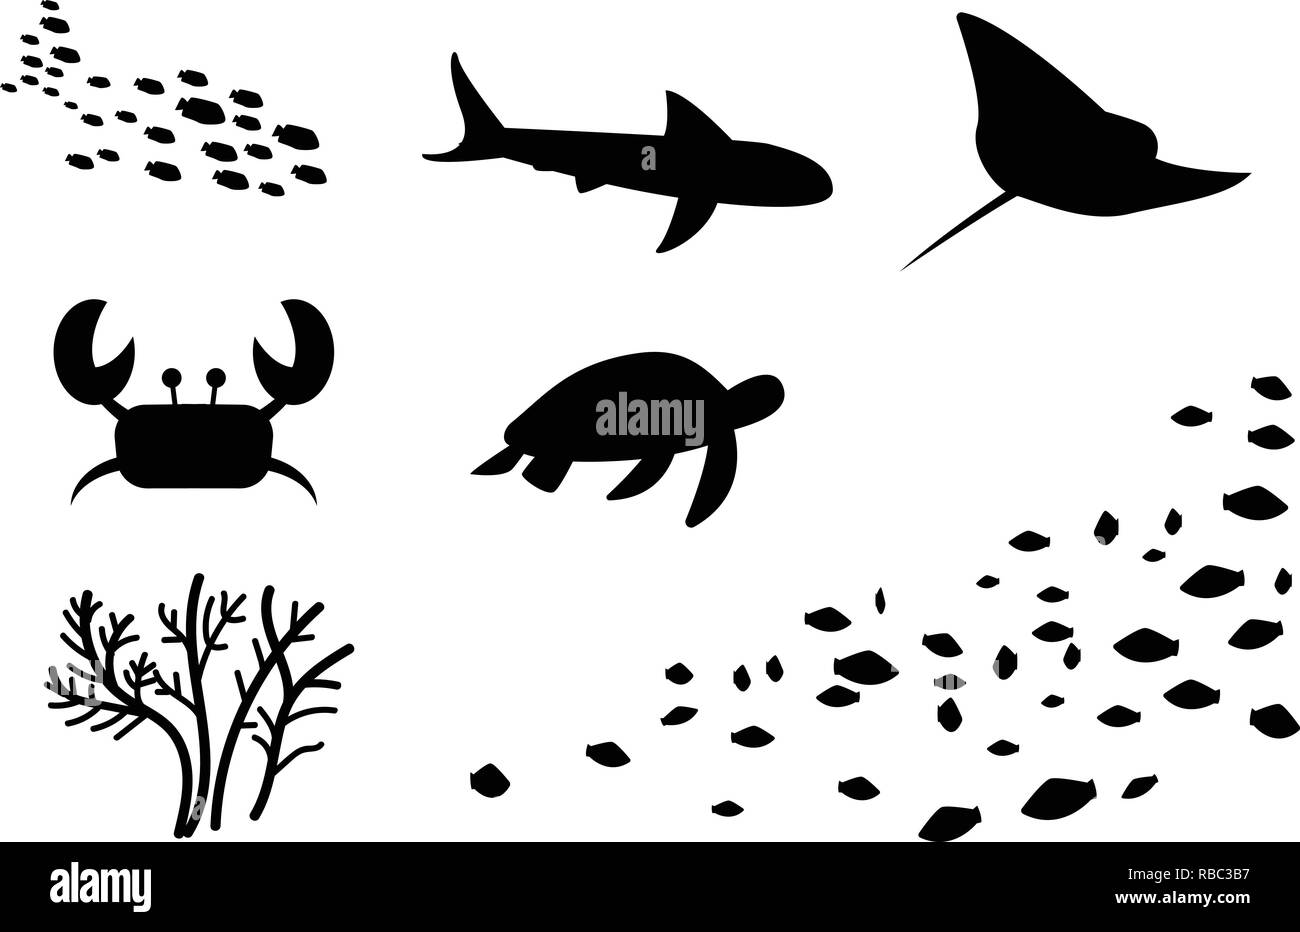 Silhouette of fish,stingray, crab, turtle, coral, vector art Stock Vector